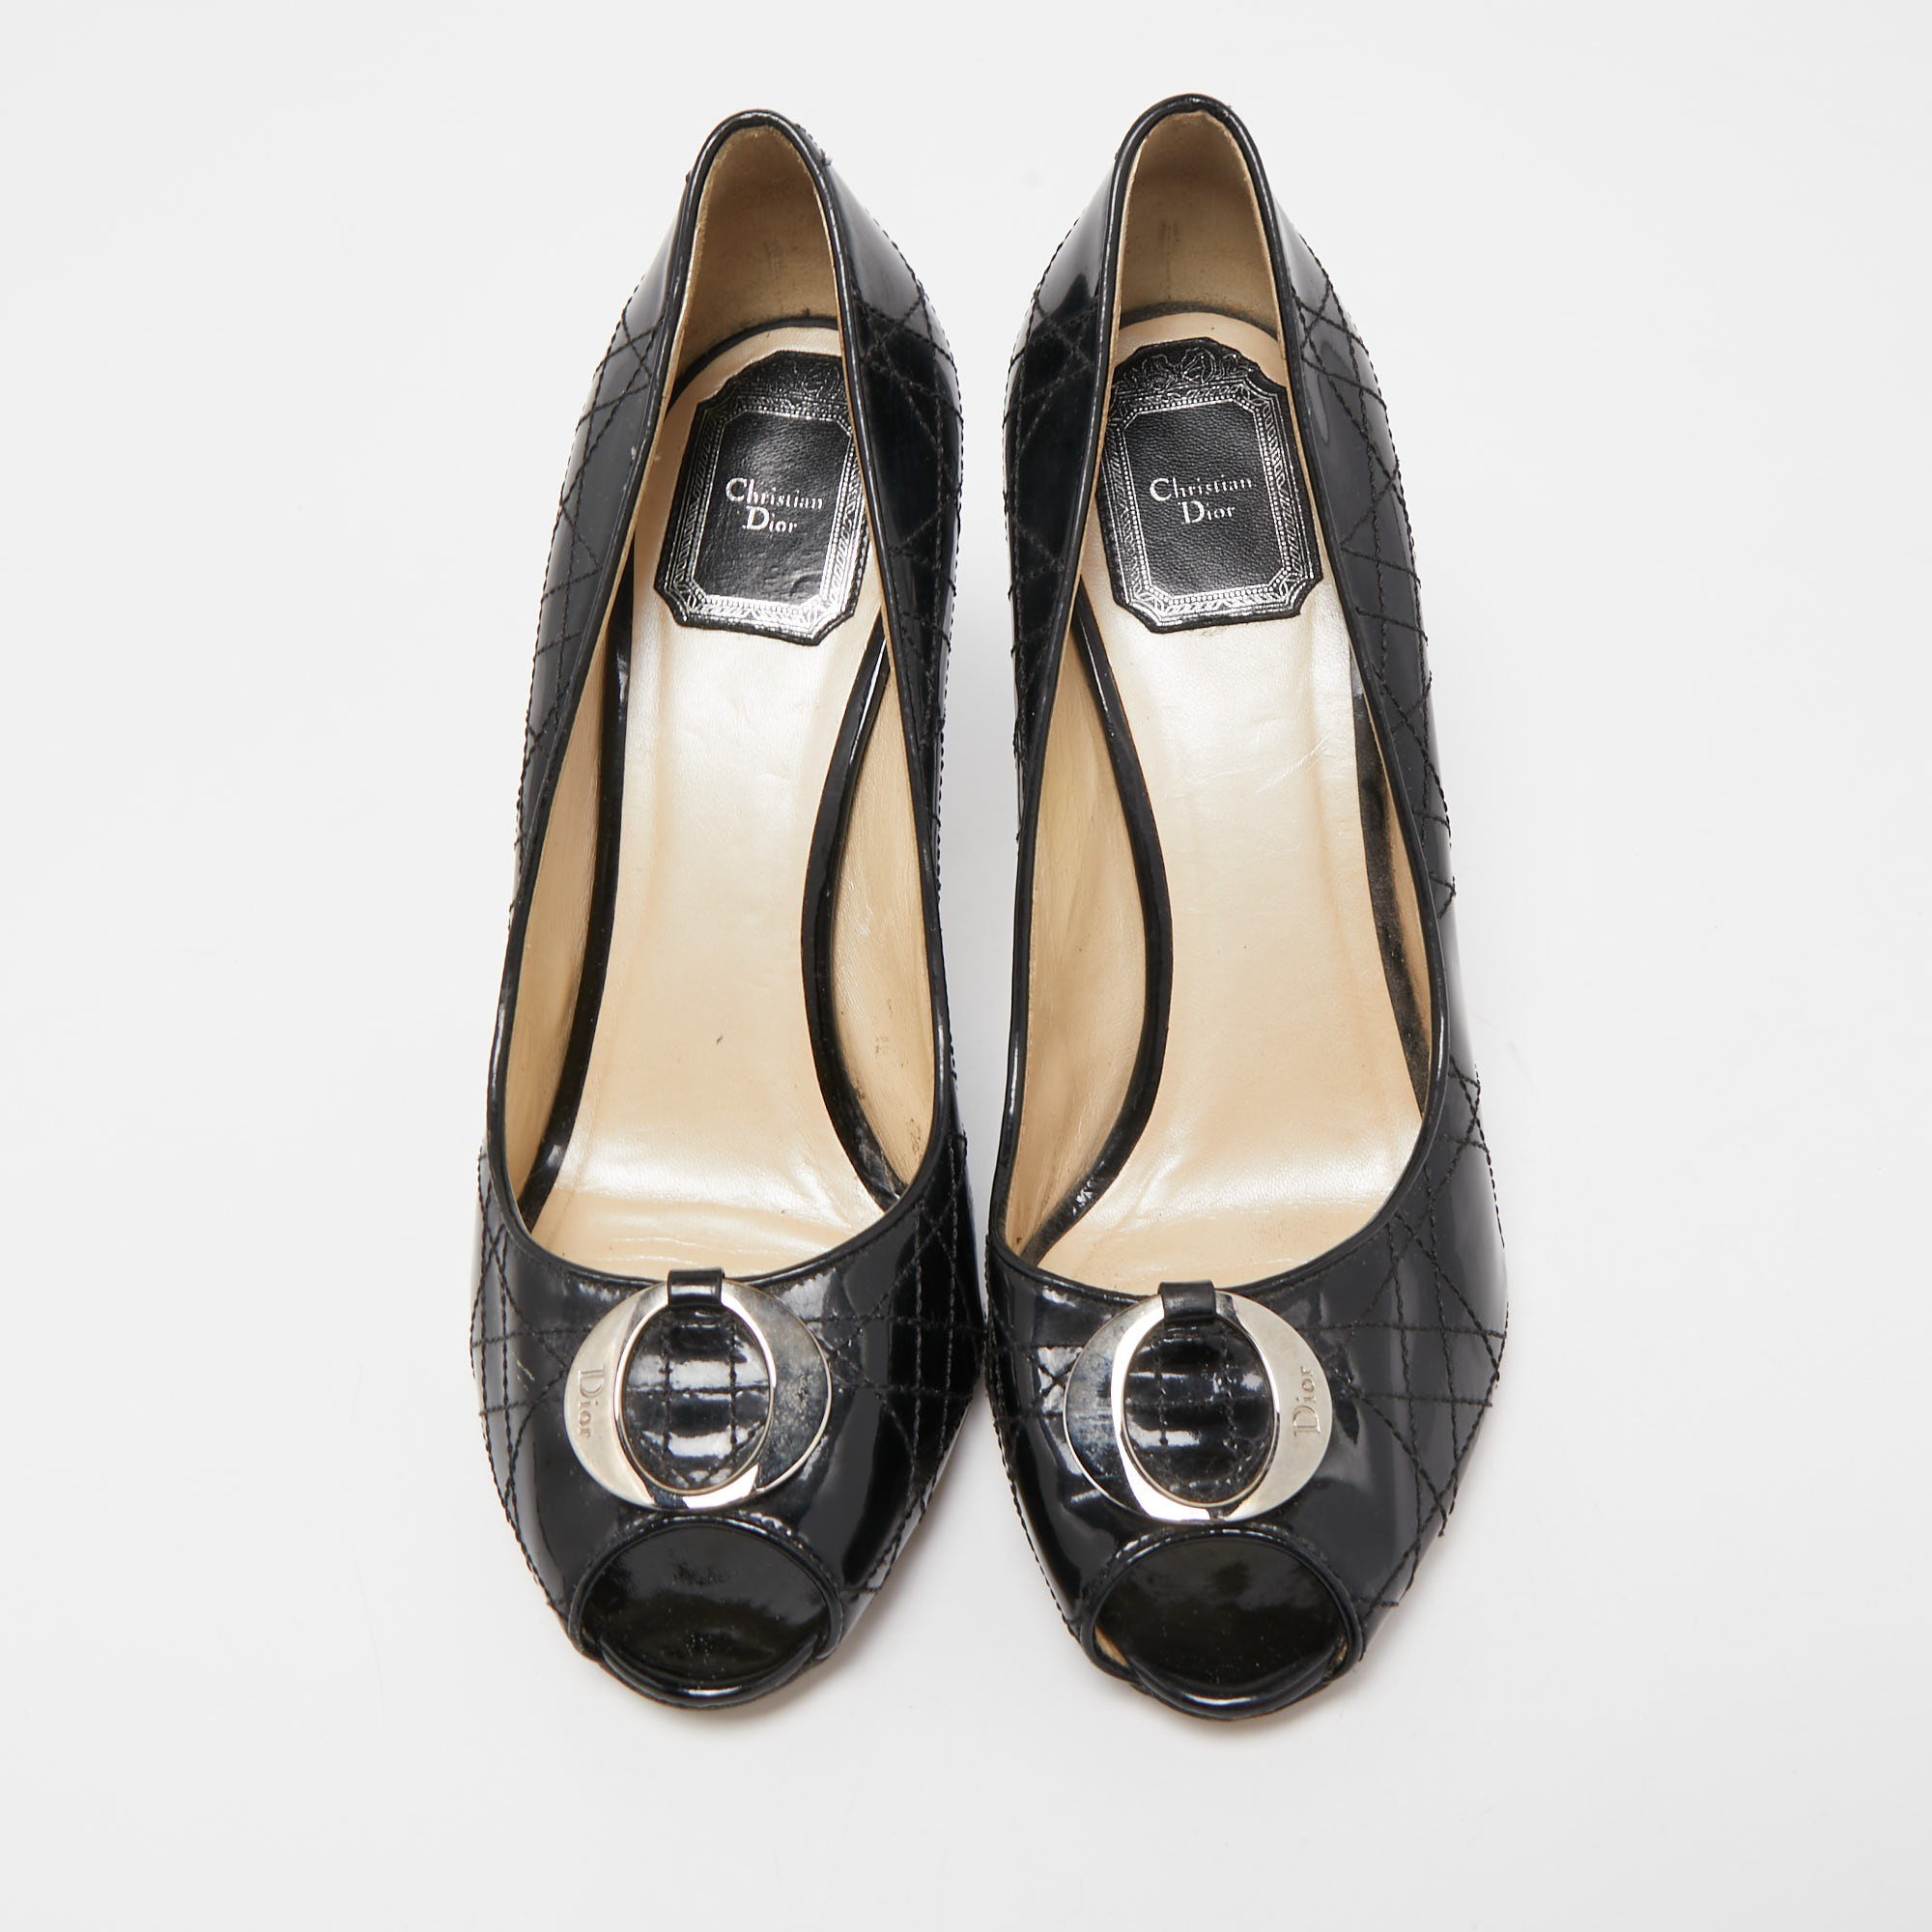 Dior Black Cannage Patent Leather Peep Toe Pumps Size 39.5